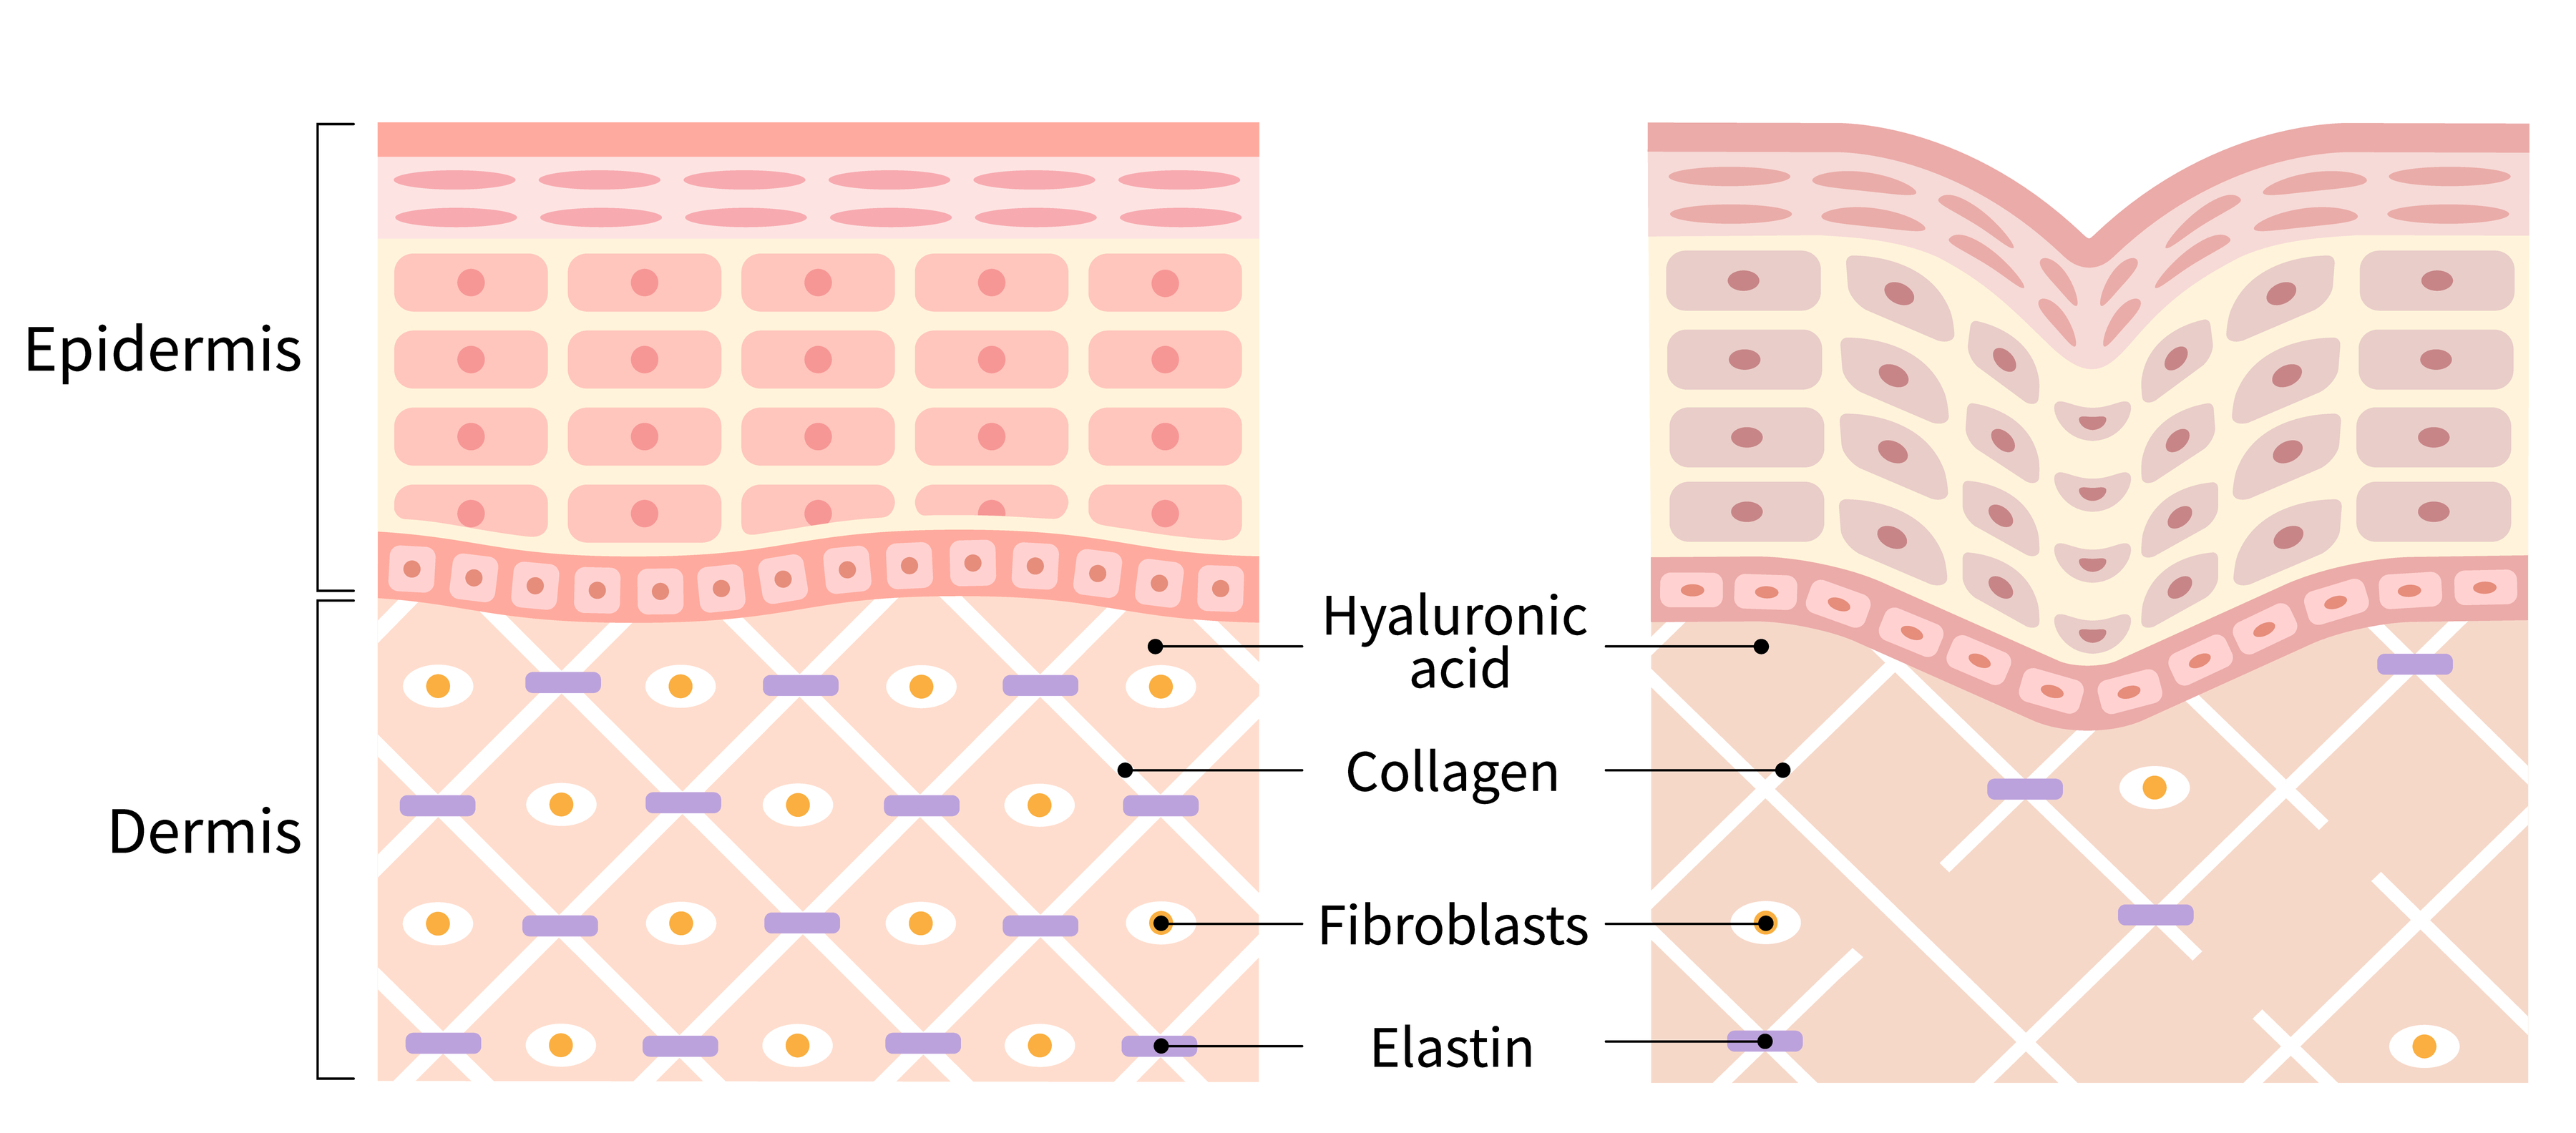 Collagen and Elastin Network in our skin